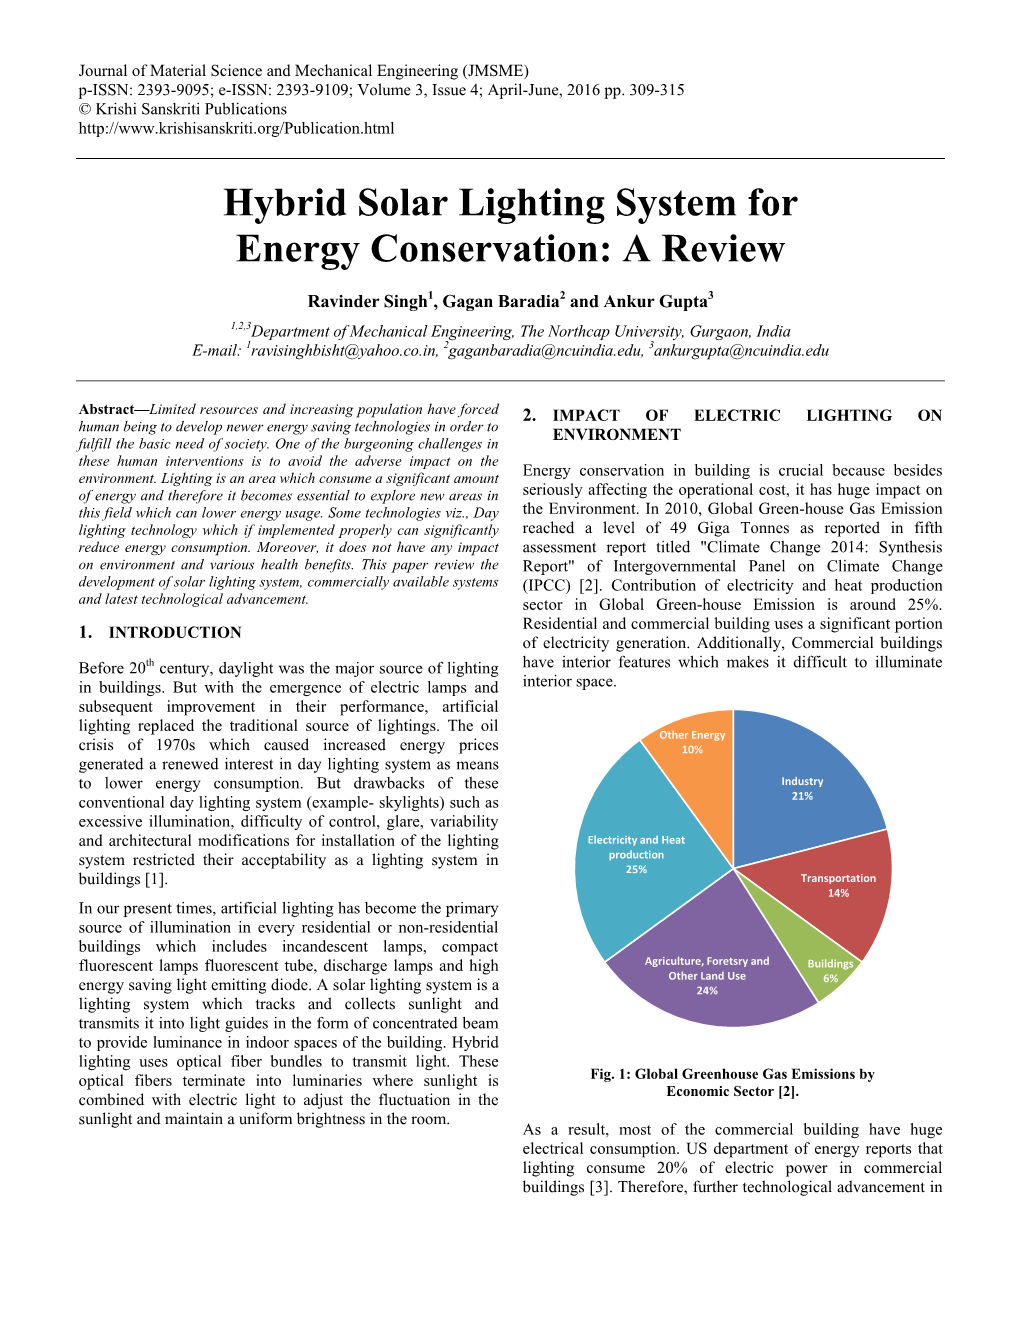 Hybrid Solar Lighting System for Energy Conservation: a Review